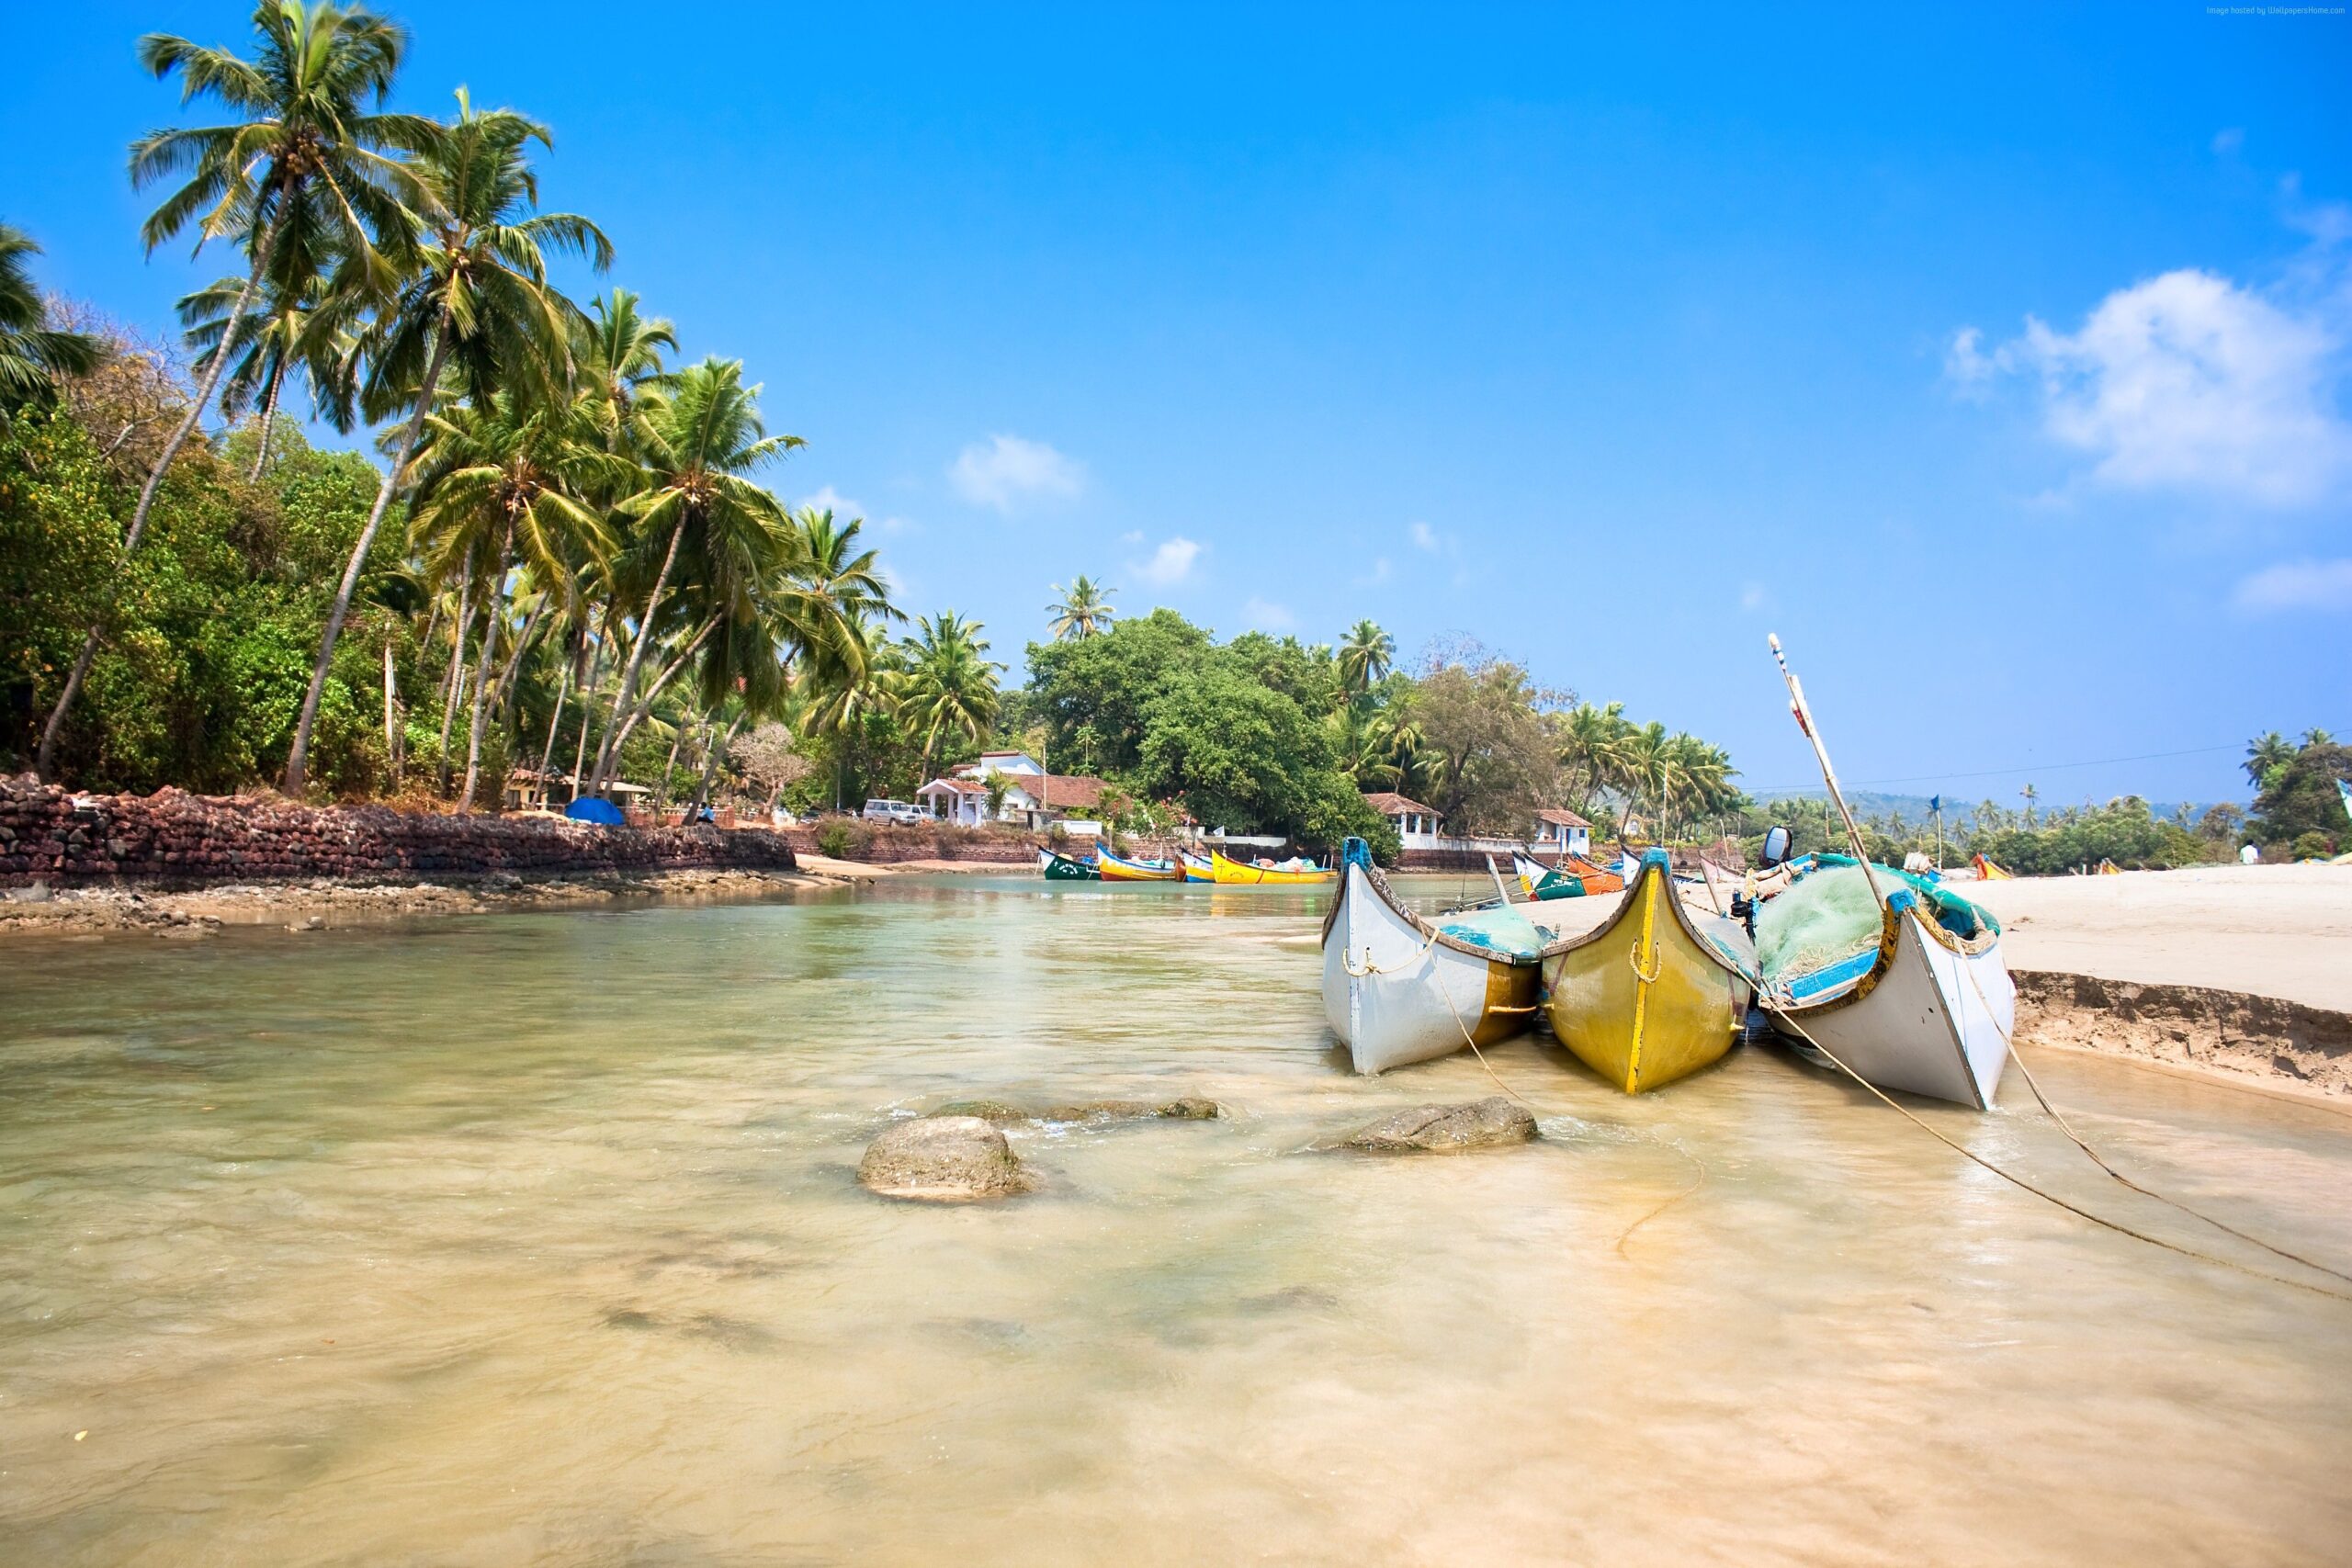 Goan Bean with three boats and palm trees